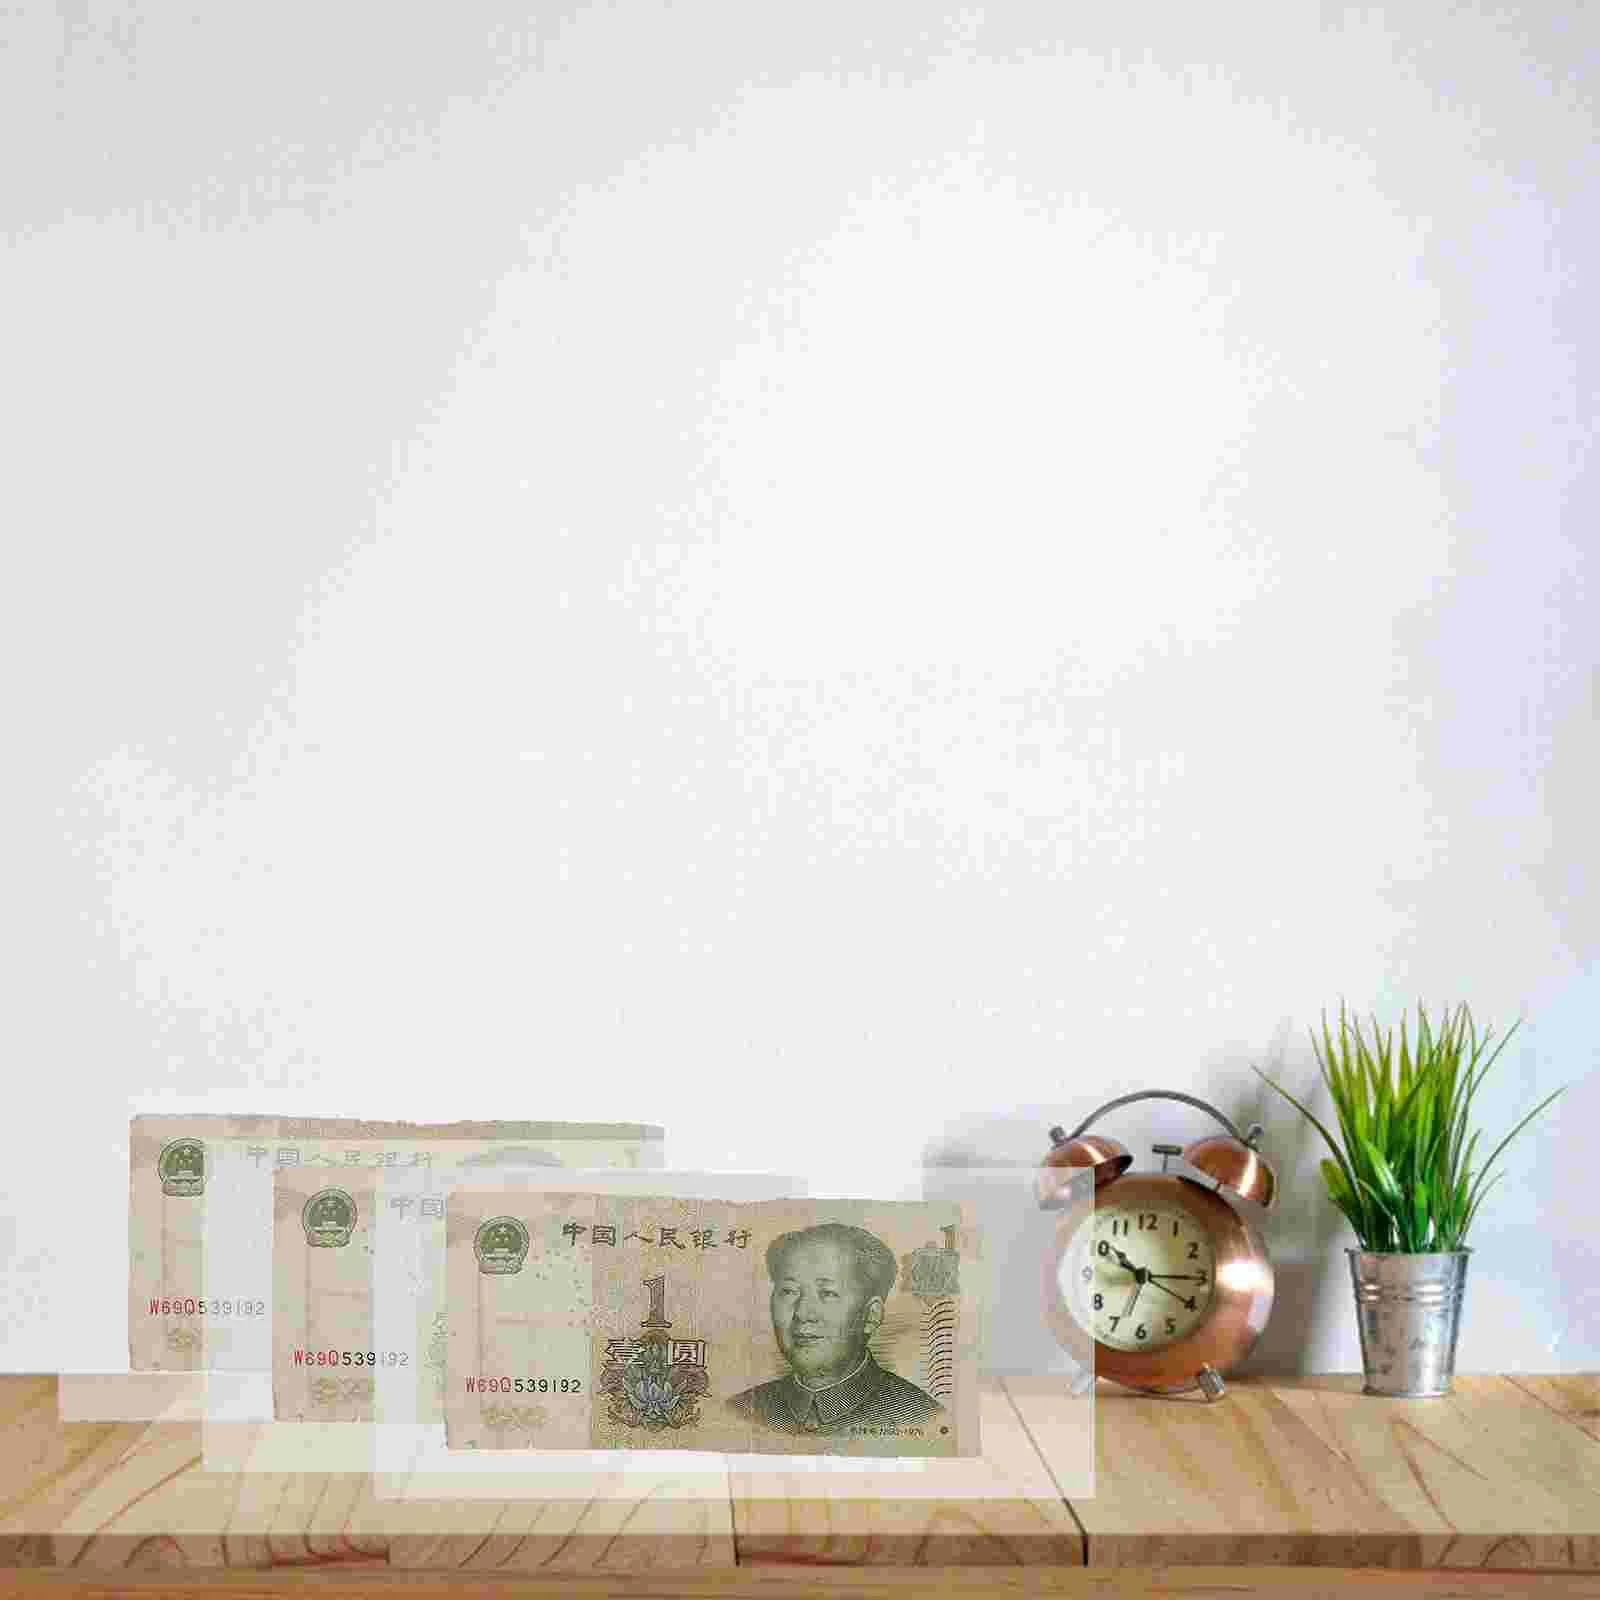 50Pcs Transparent Bill Small Banknote Protective Bags Banknotes Holders Commemorative Holder